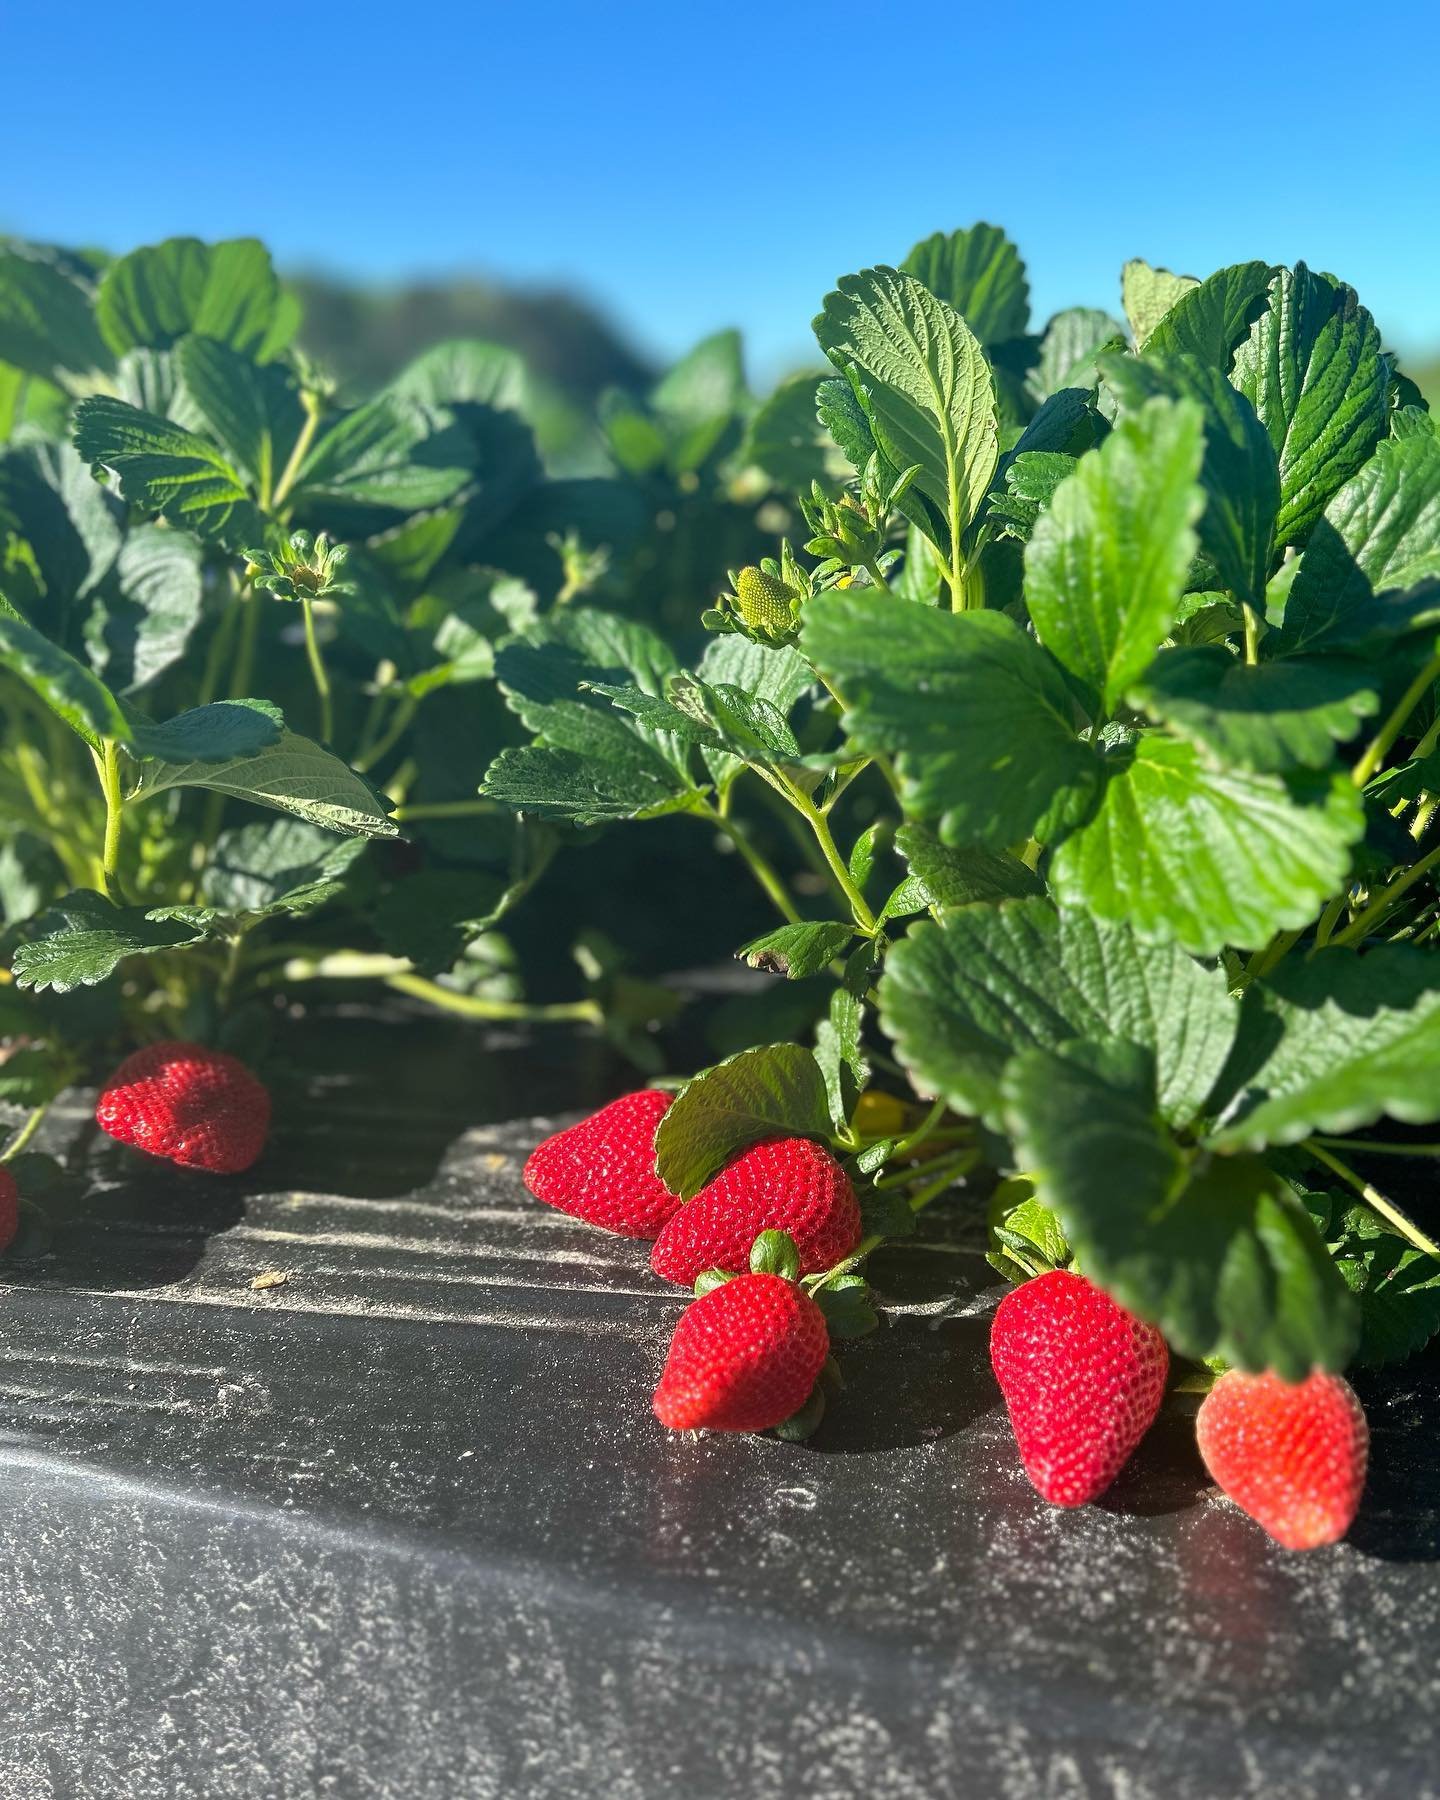 Happy Saturday! We are open from 9 to 5 today and we have a lots of berries to be picked!